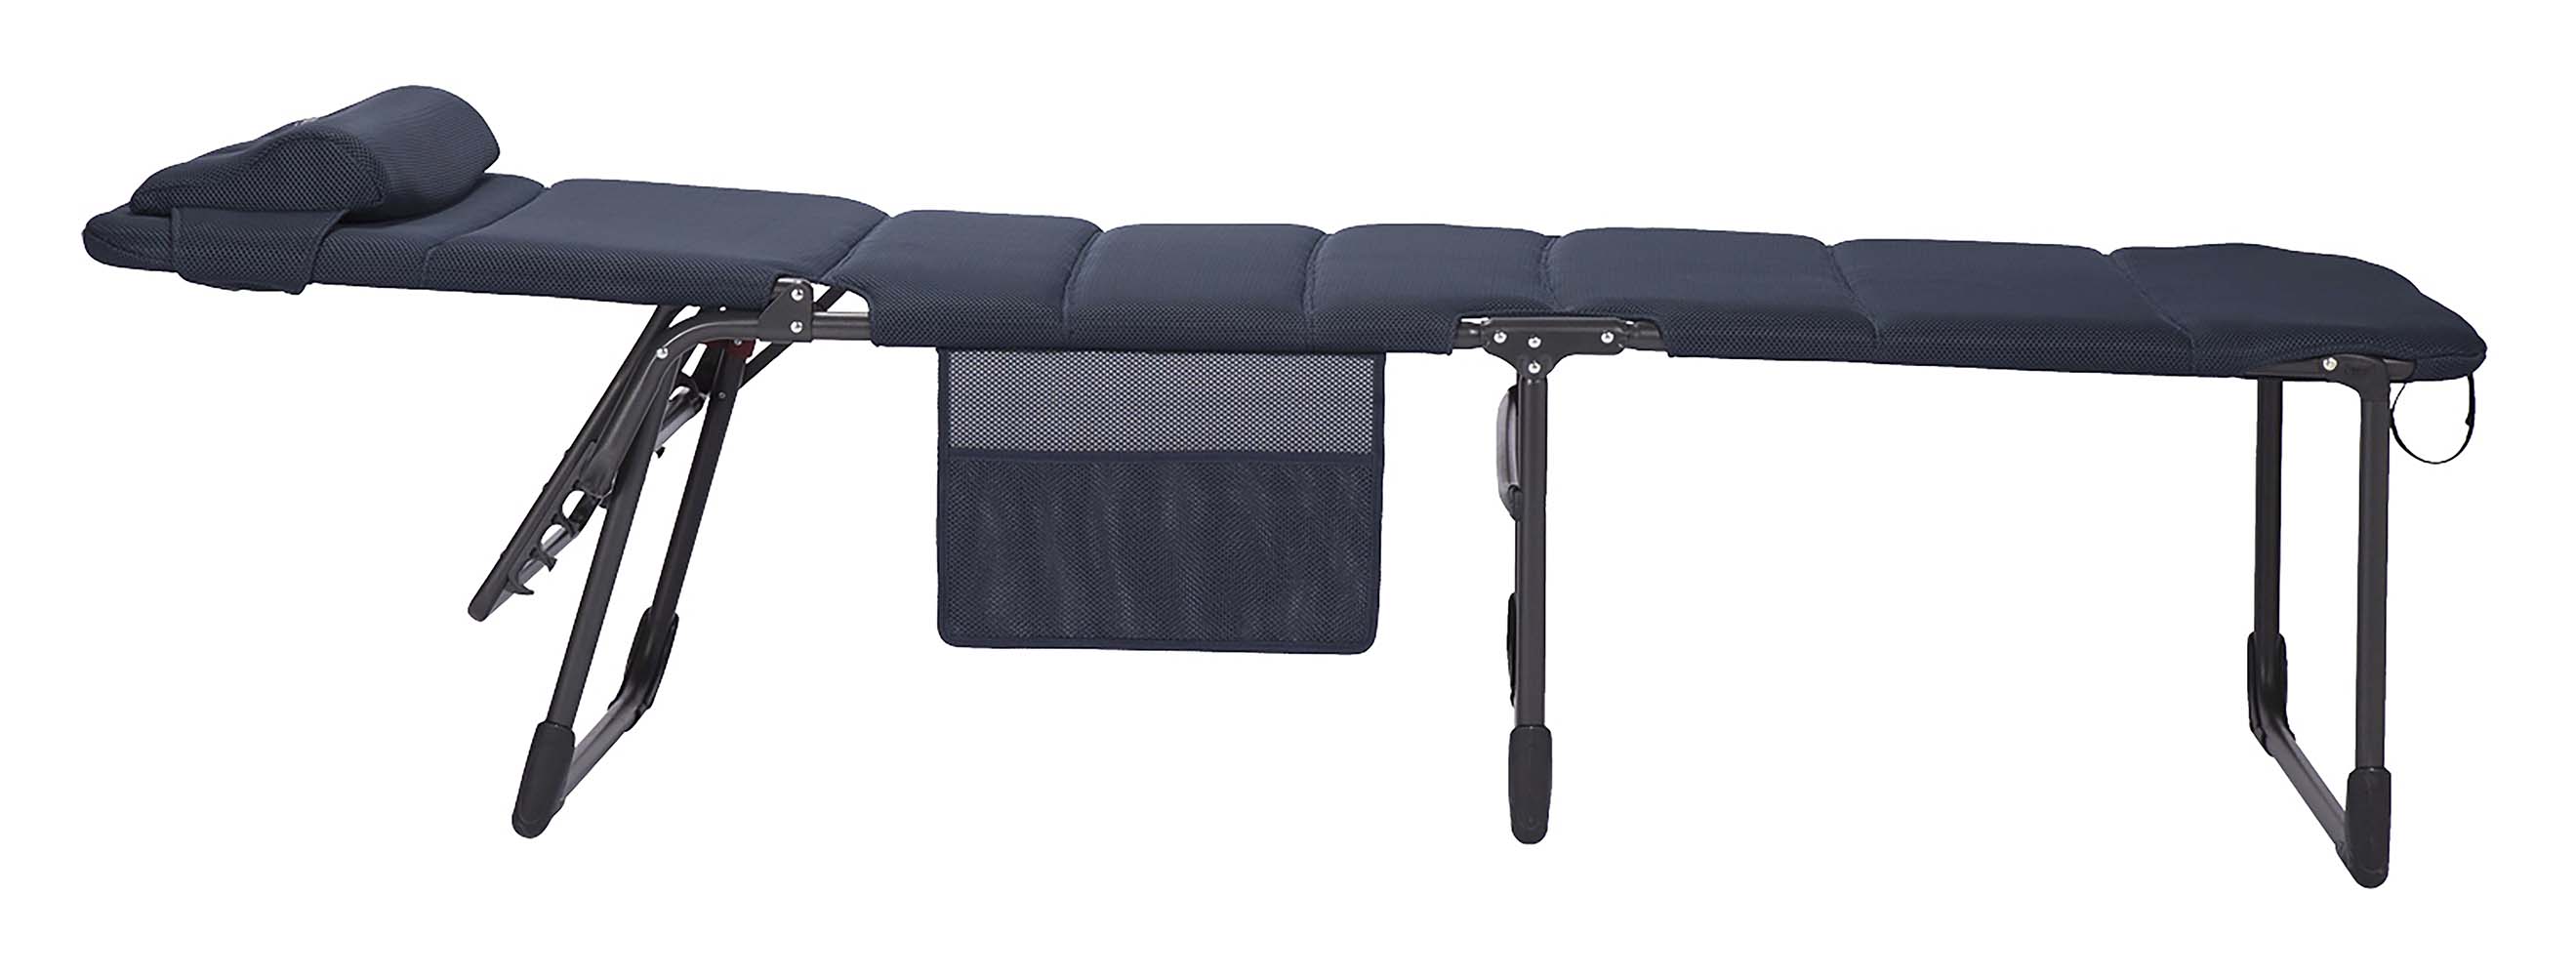 Crespo-  Vouwbed - AP/363 - Air-Deluxe - Blauw detail 4